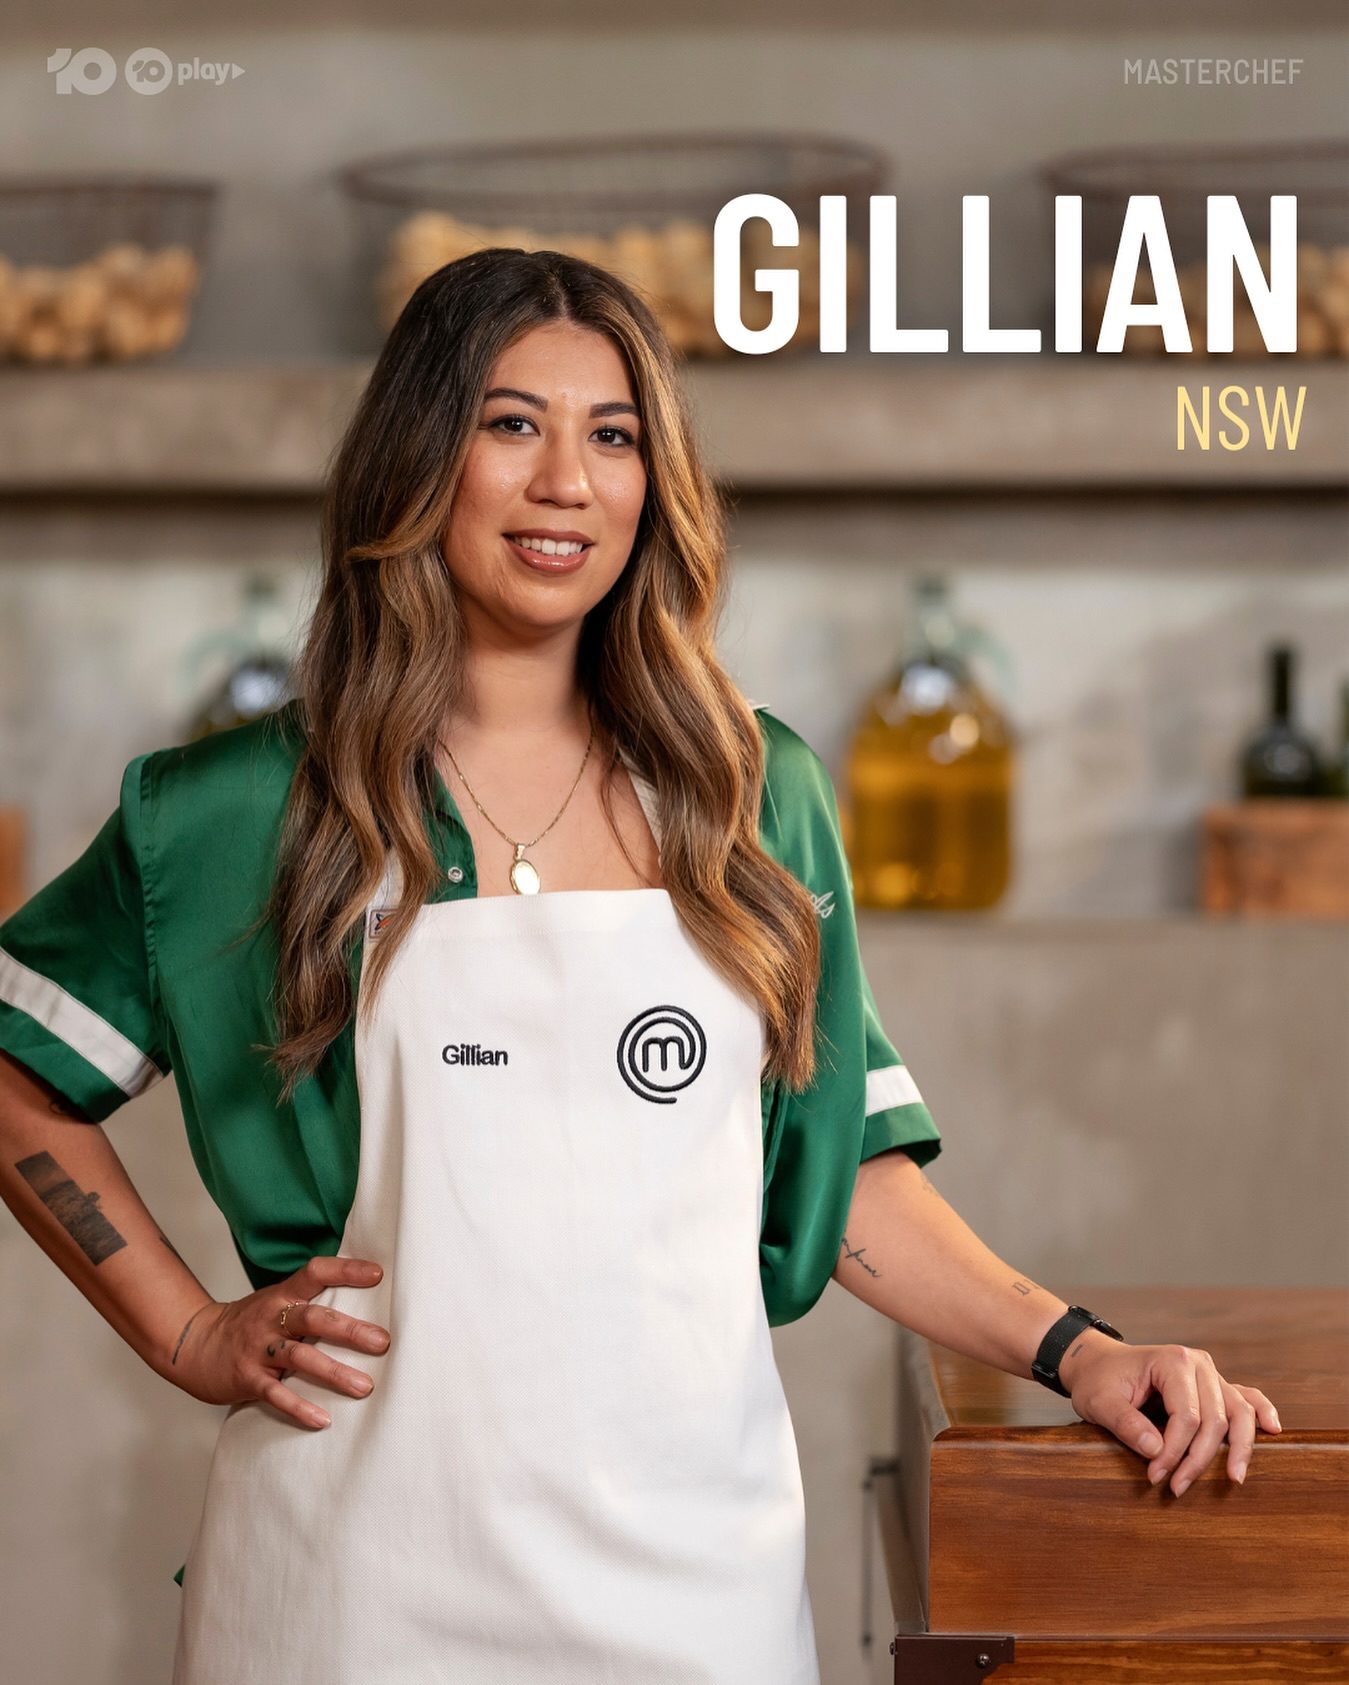 Gillian hails from Wollongong, NSW